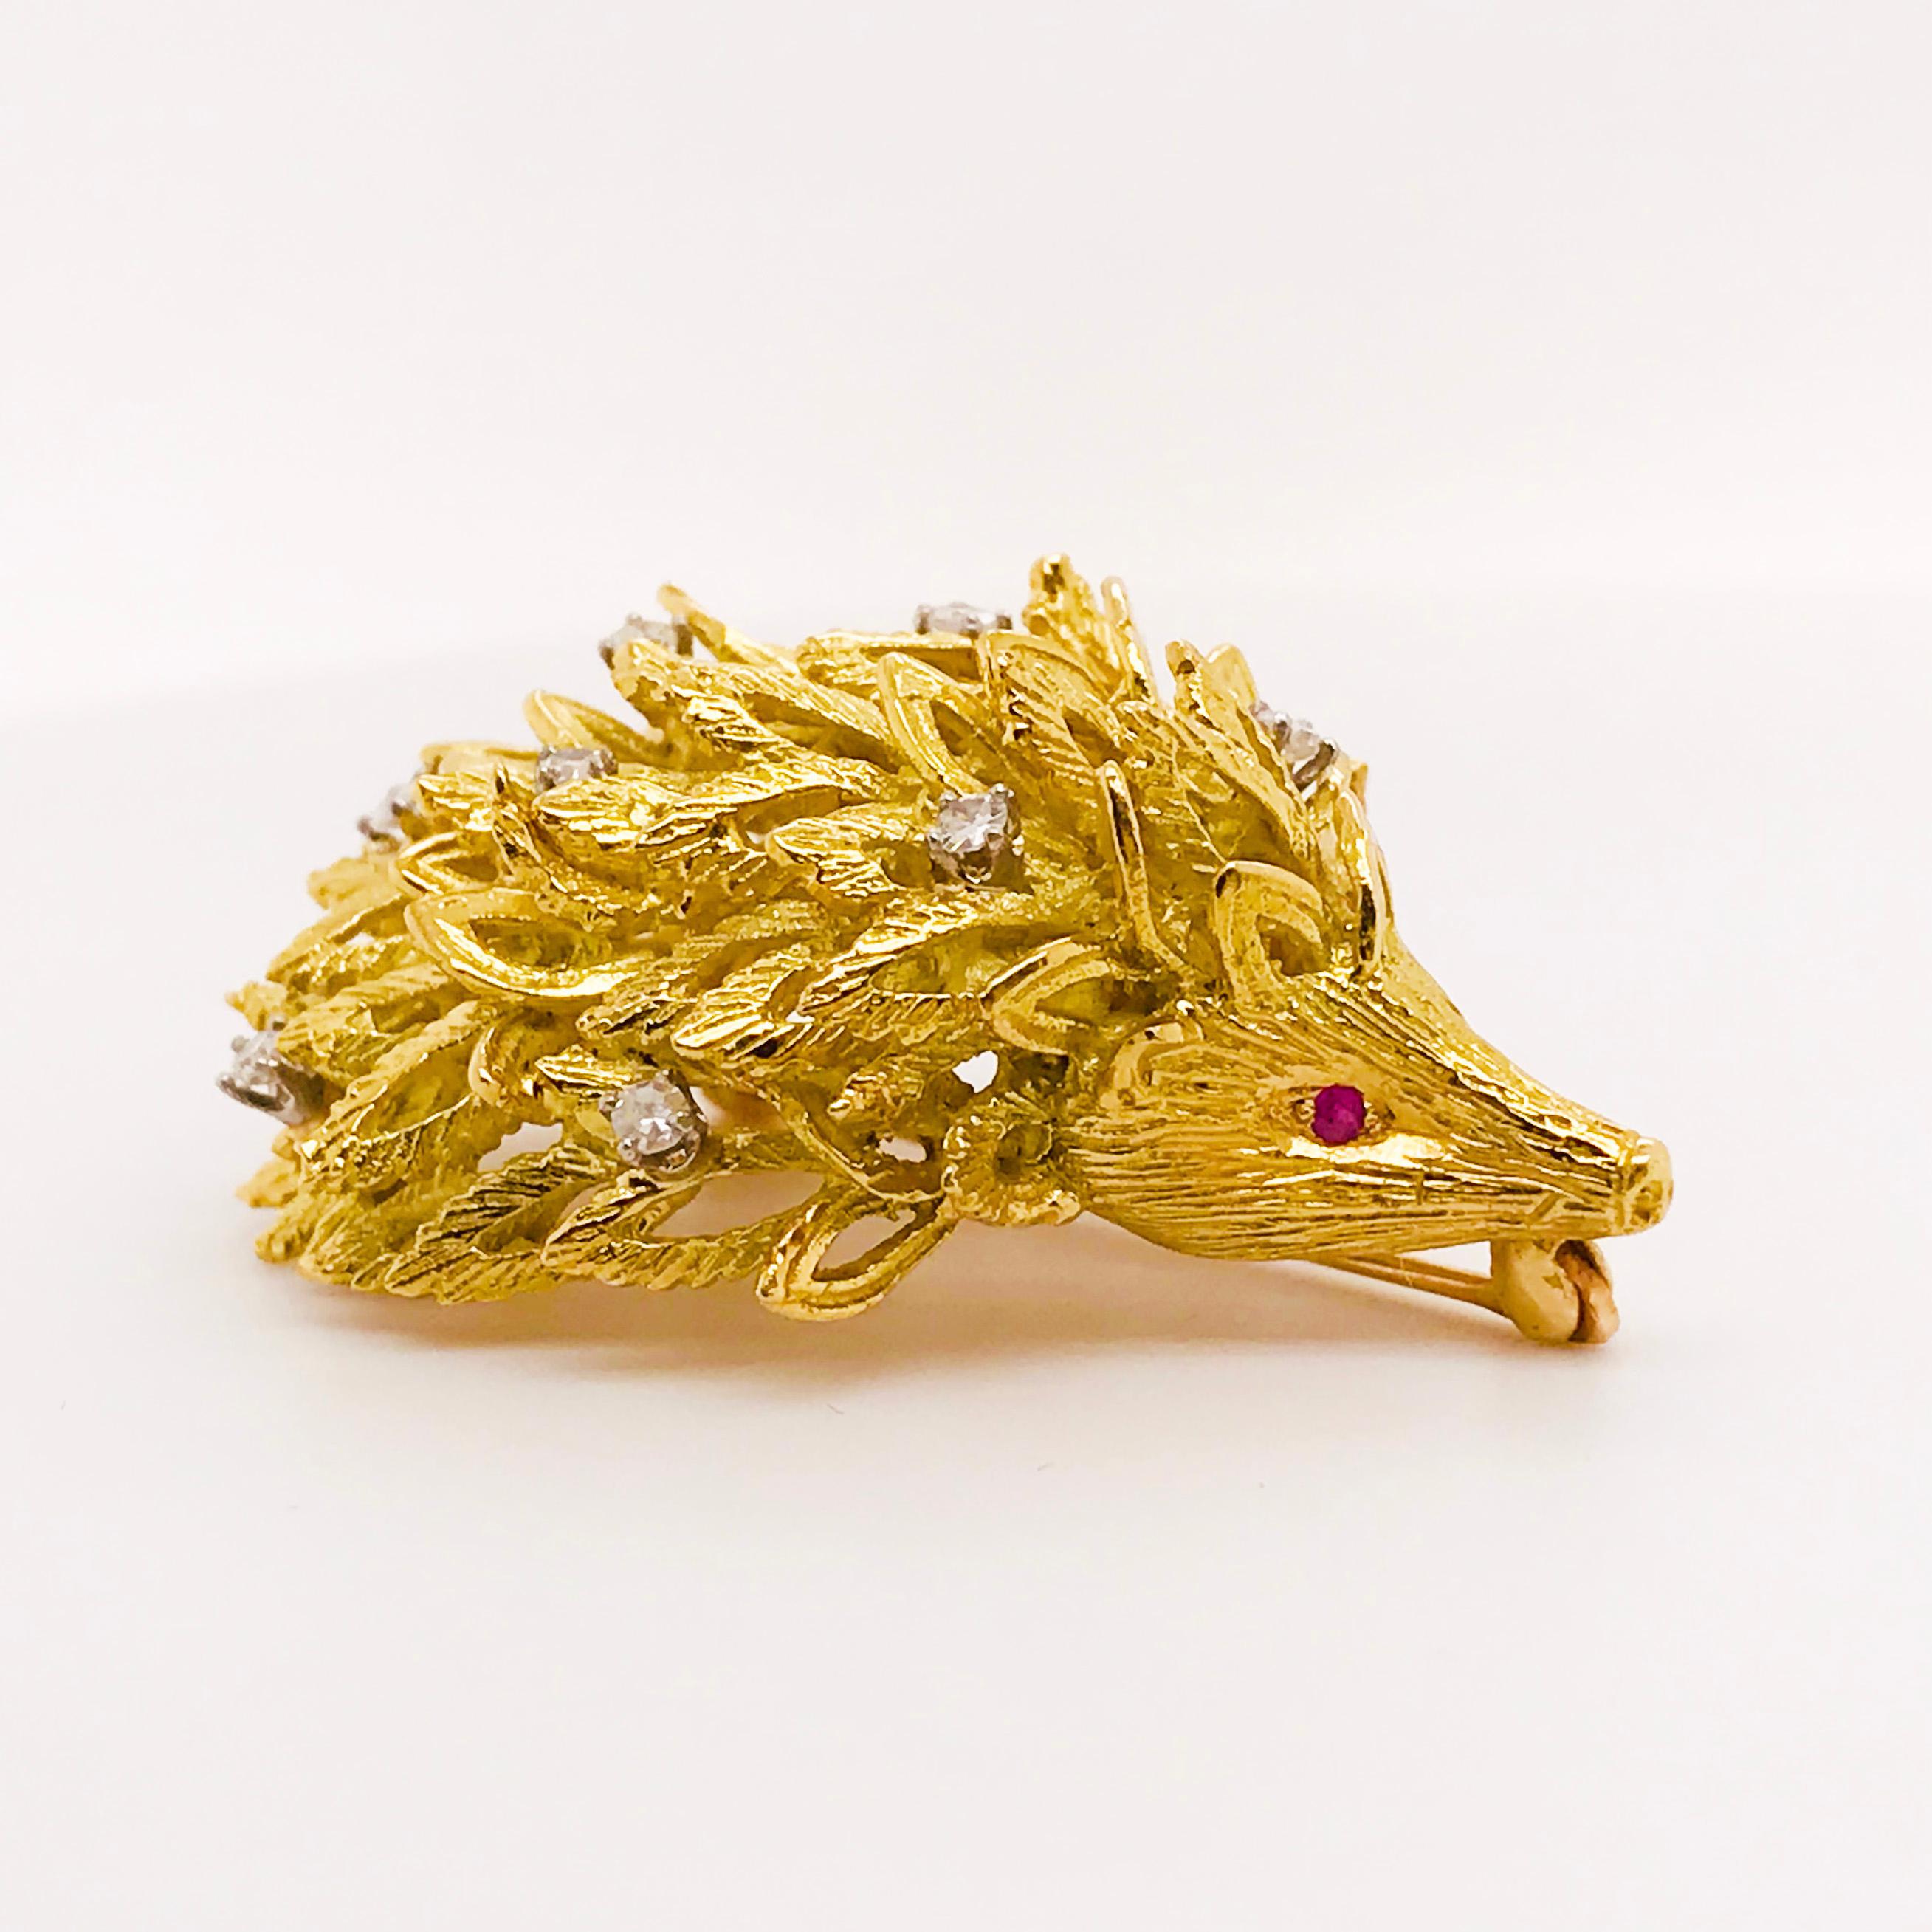 This fabulous, adorable 14kt gold diamond and ruby porcupine is so unique and fun! This adorable animal brooch has been handcrafted with 14k yellow gold, genuine diamonds and genuine ruby gemstones! The porcupine has a bark finish/texture that